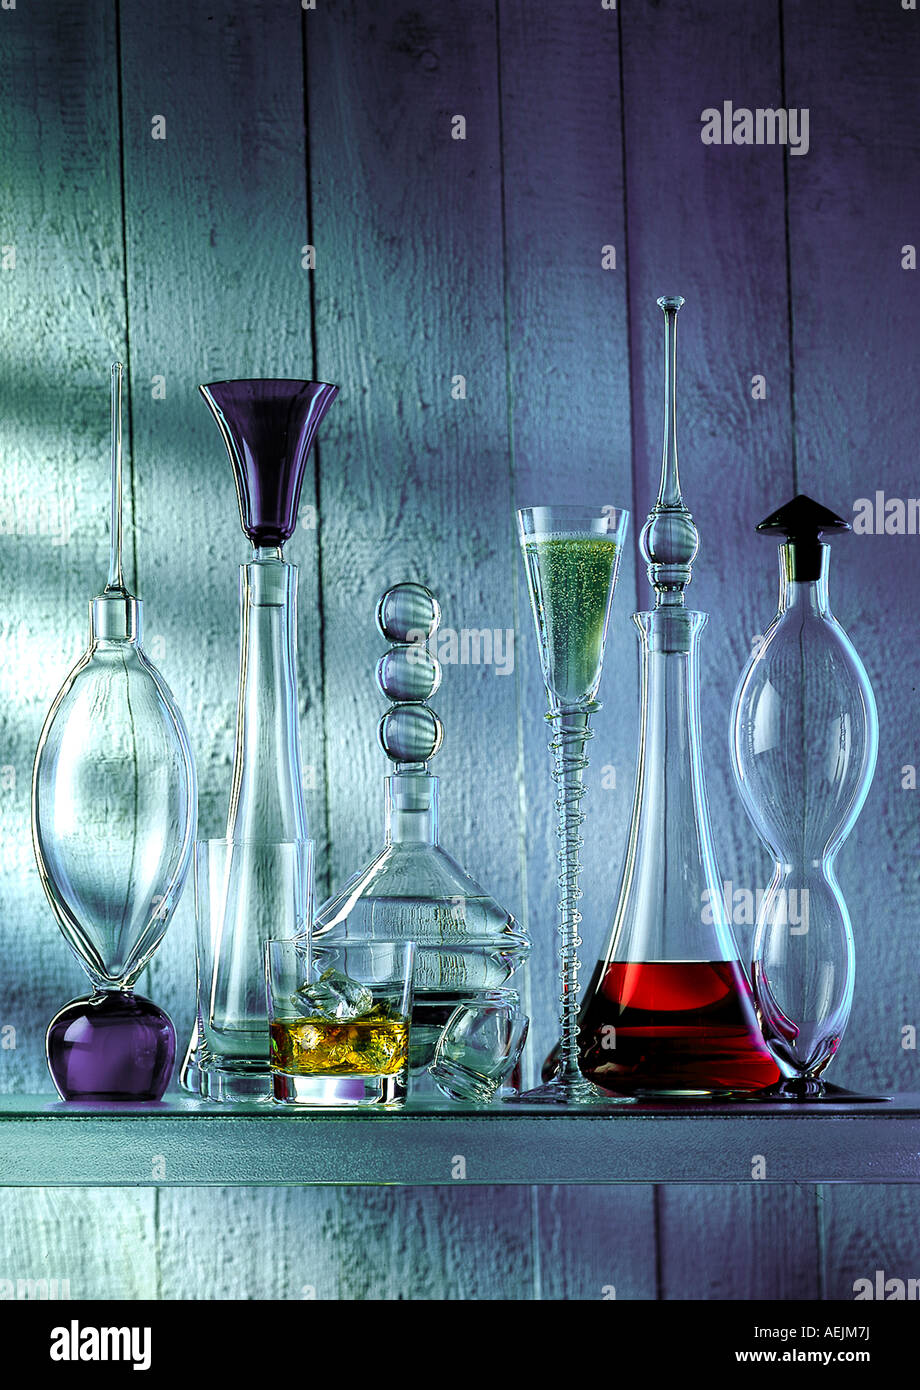 Glass art: drink glasses and carafes Stock Photo